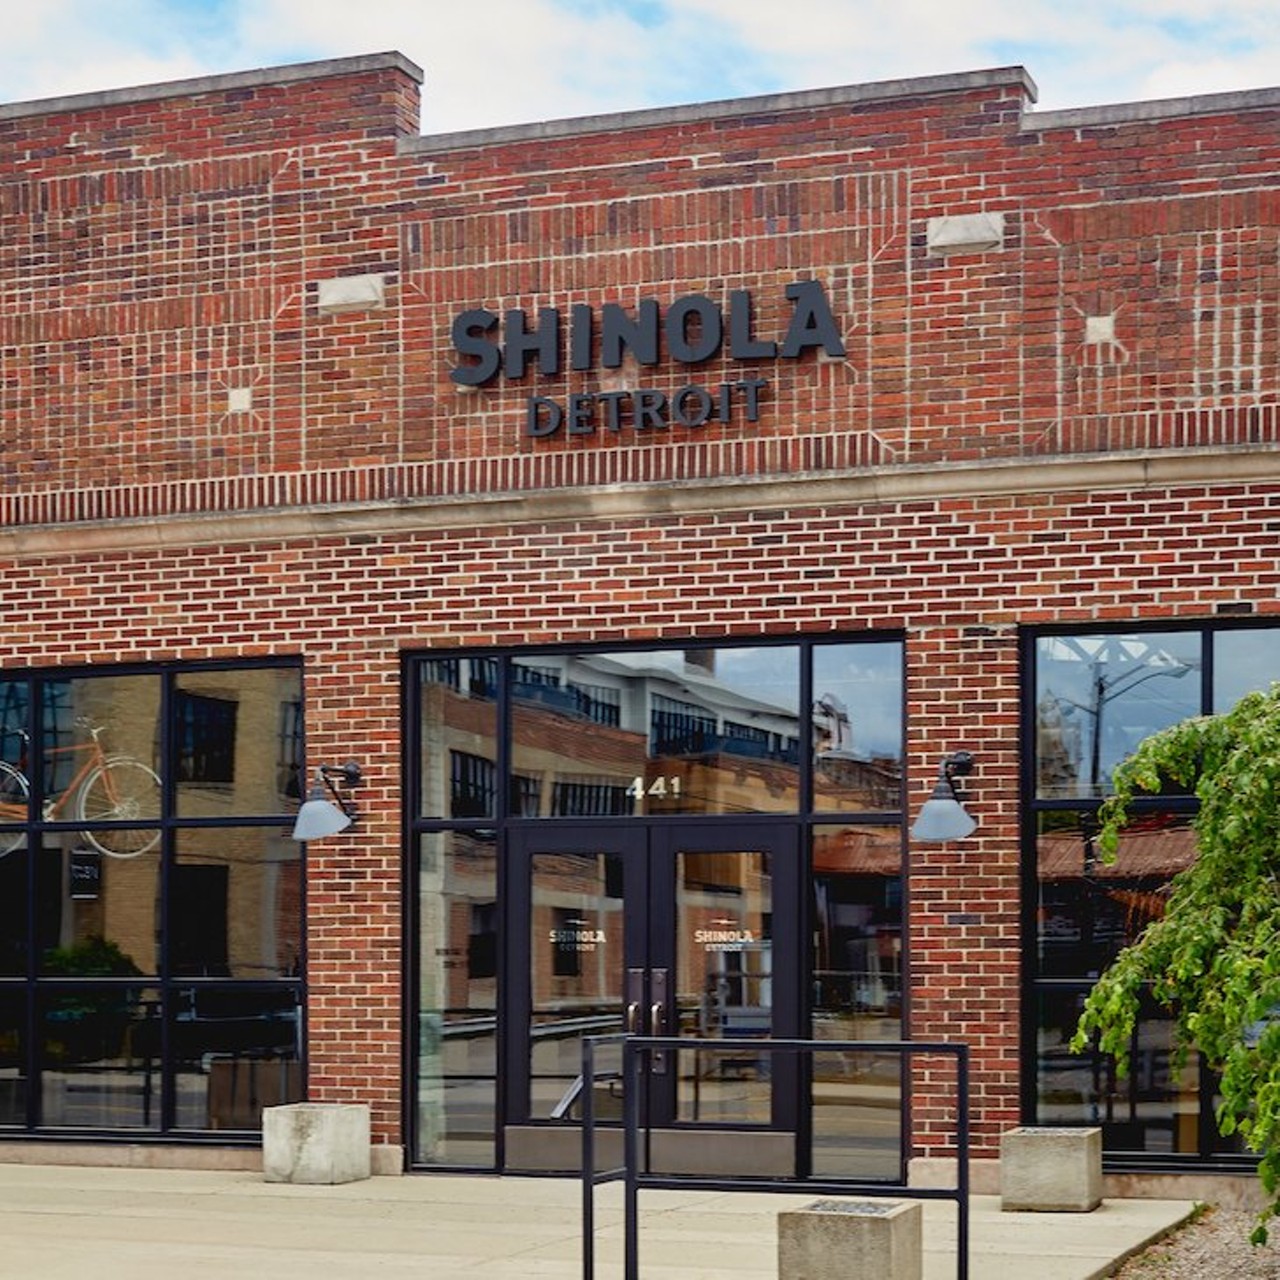 Shinola
441 W. Canfield St., 313-285-2390, shinola.com
Founded in 2011, workers at the luxury goods retail brand Shinola&#146;s Detroit factory hand-assemble between 500 and 700 watches daily. Shinola also sells bicycles, leather goods, jewelry, clocks, and lifestyle and audio products.
Photo via Shinola/Facebook